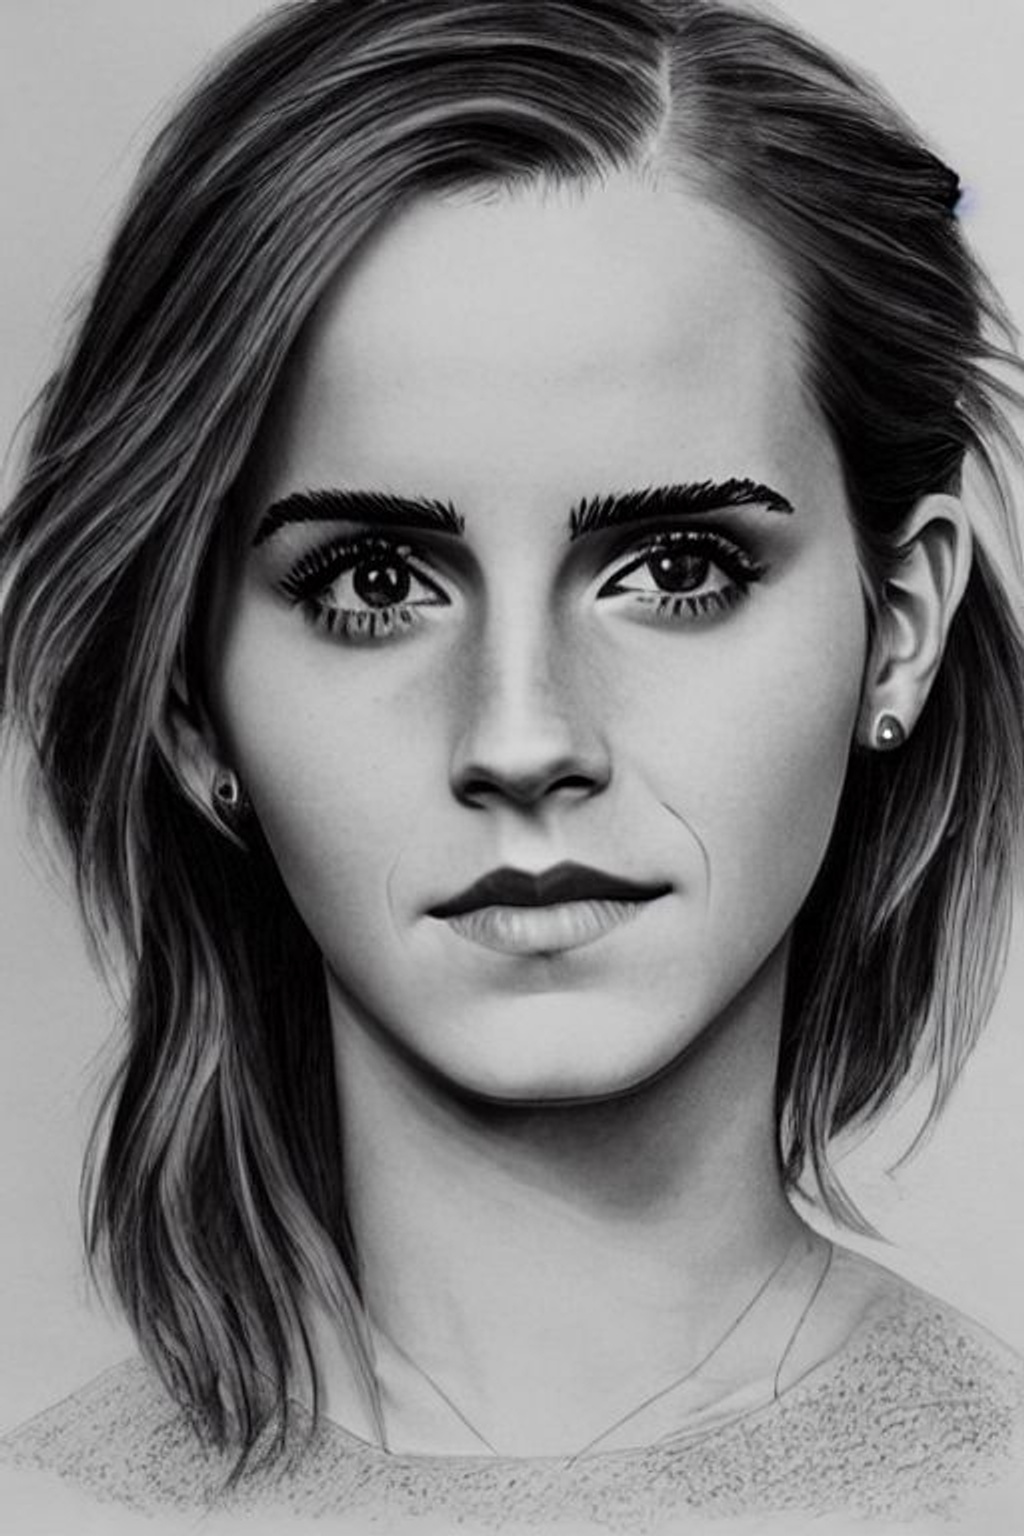 Learn how to draw a Emma Watson drawing - Easy people drawings